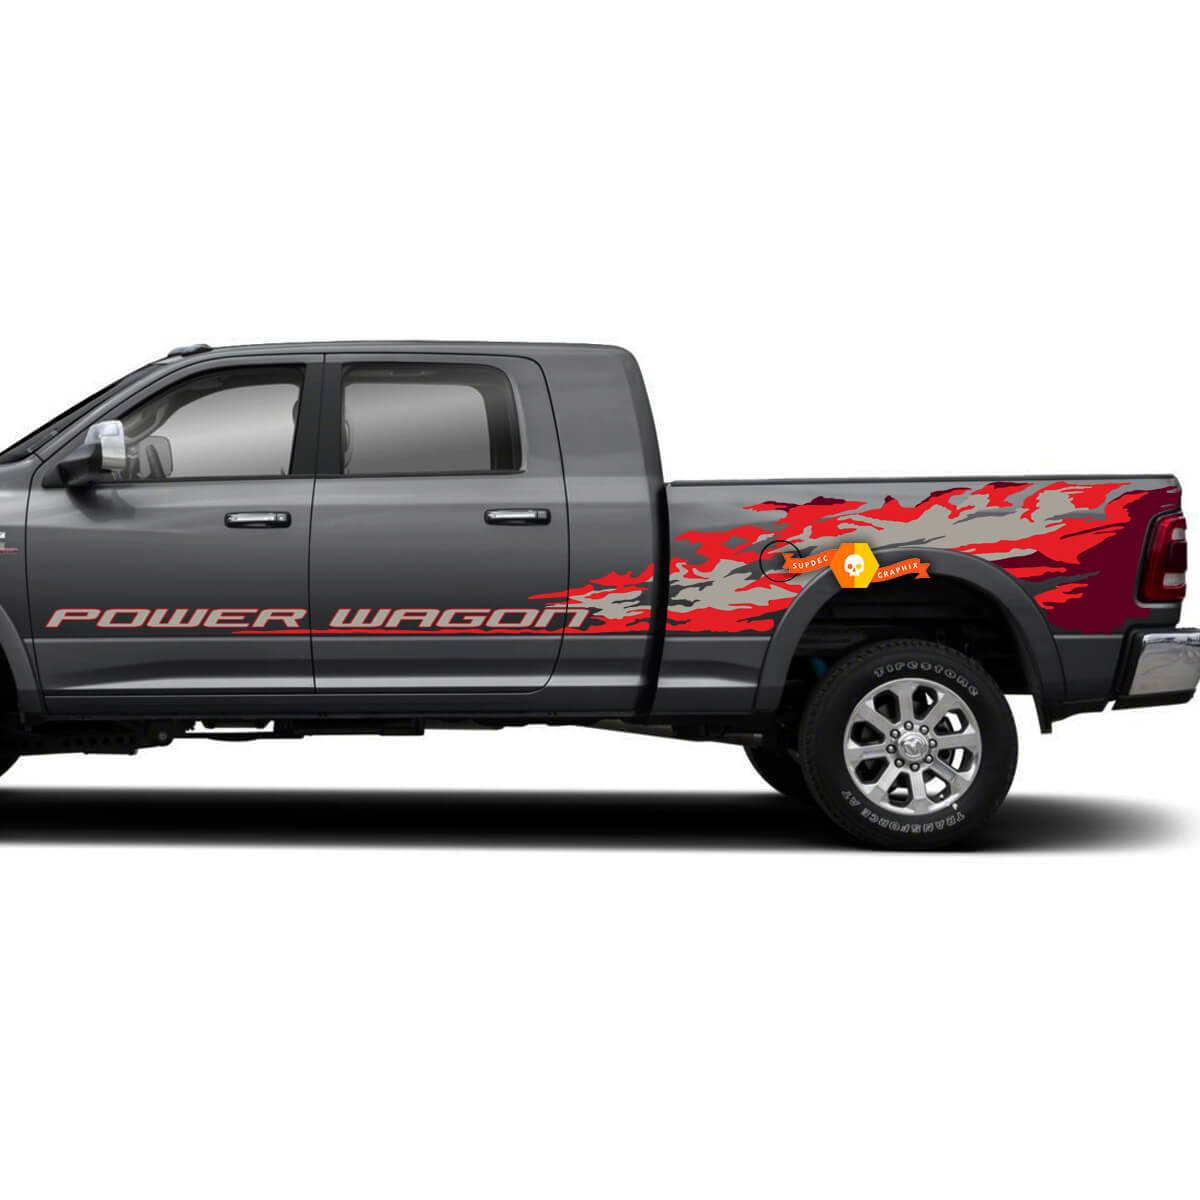 Dodge Ram Power Wagon kit of Hemi decal sticker for Tailgate driver and passenger side
